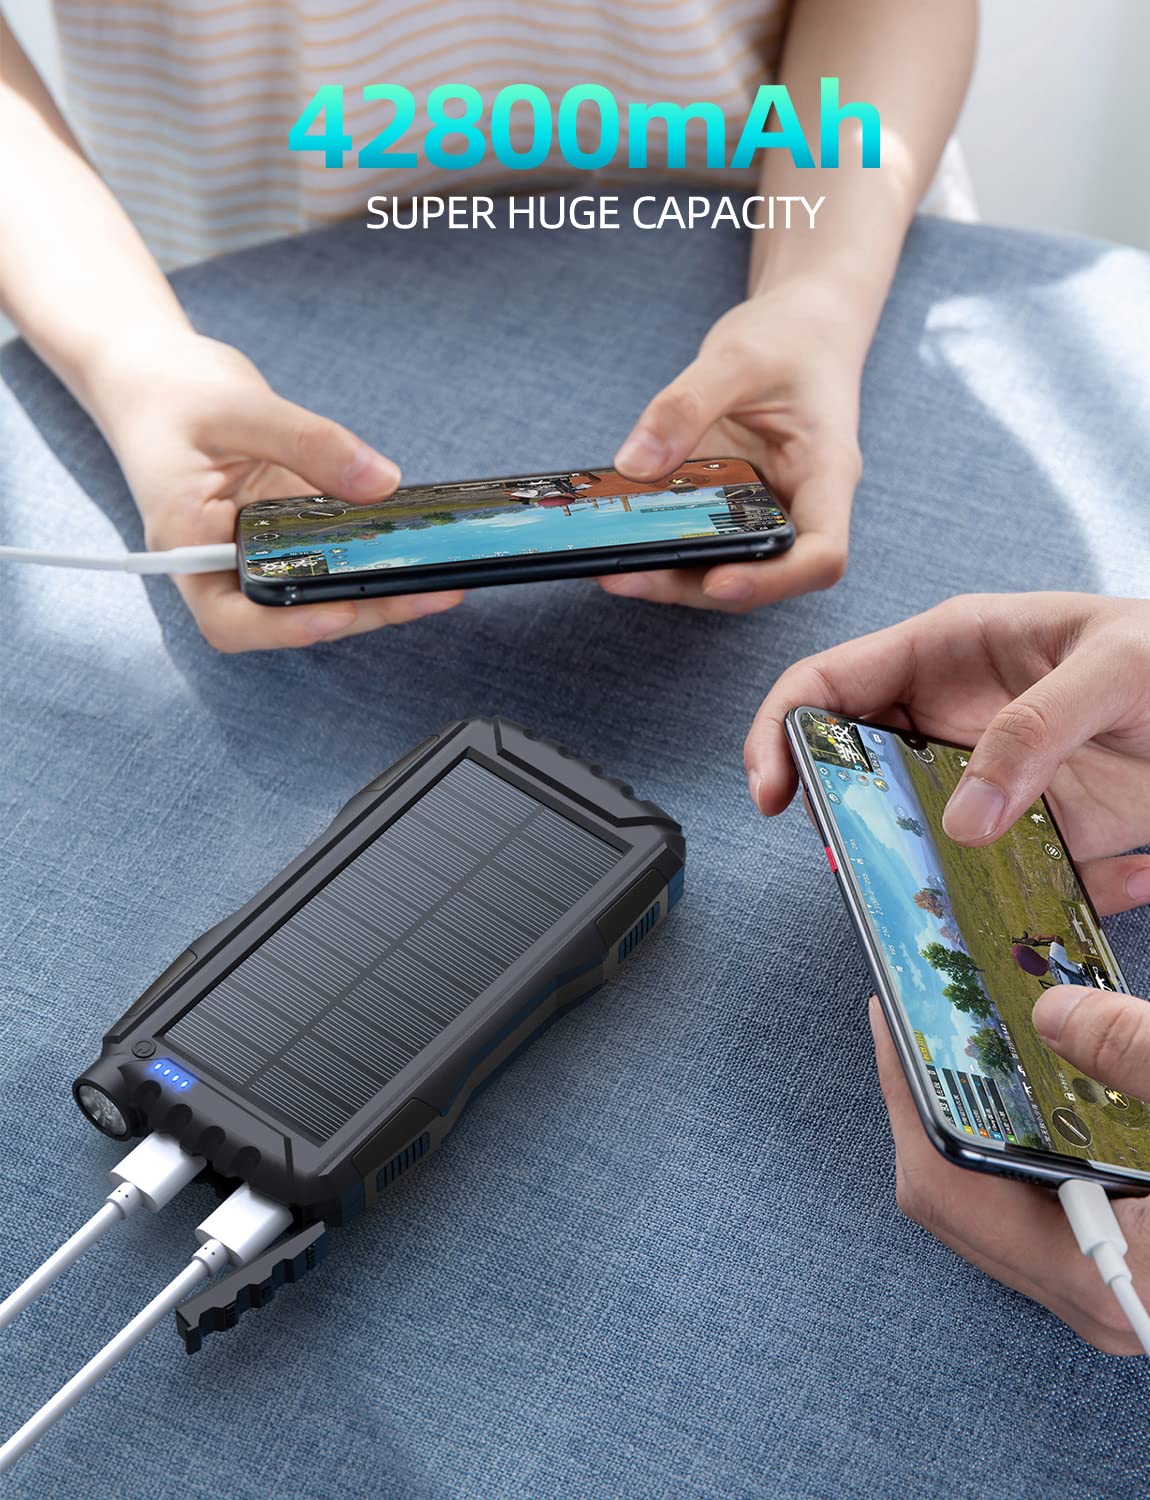 Solar-Charger-Power-Bank - 42800mAh Power Bank,Portable Charger,External Battery Pack 5V3.1A Qc 3.0 Fast Charging Built-in Super Bright Flashlight (Deep Black)